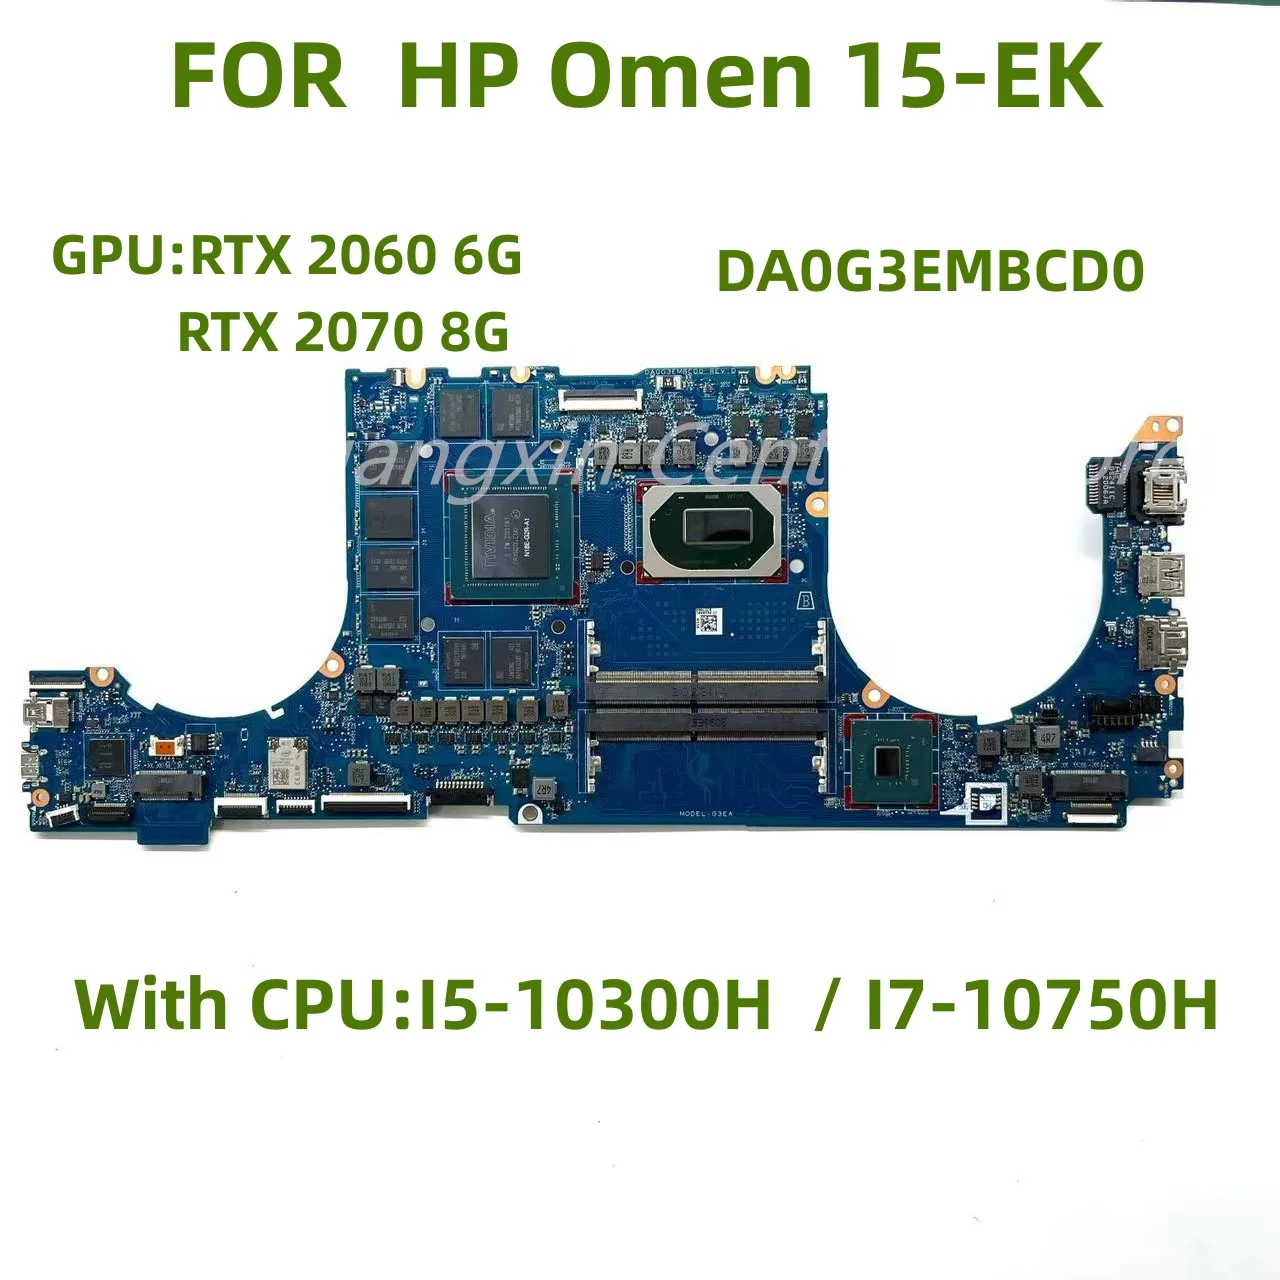 

DA0G3EMBCD0 is suitable for HP OMEN 15 15-EK laptop motherboard with I5-10300H I7-10750H CPU GPU: RTX 2060 6G / RTX 2070 8G